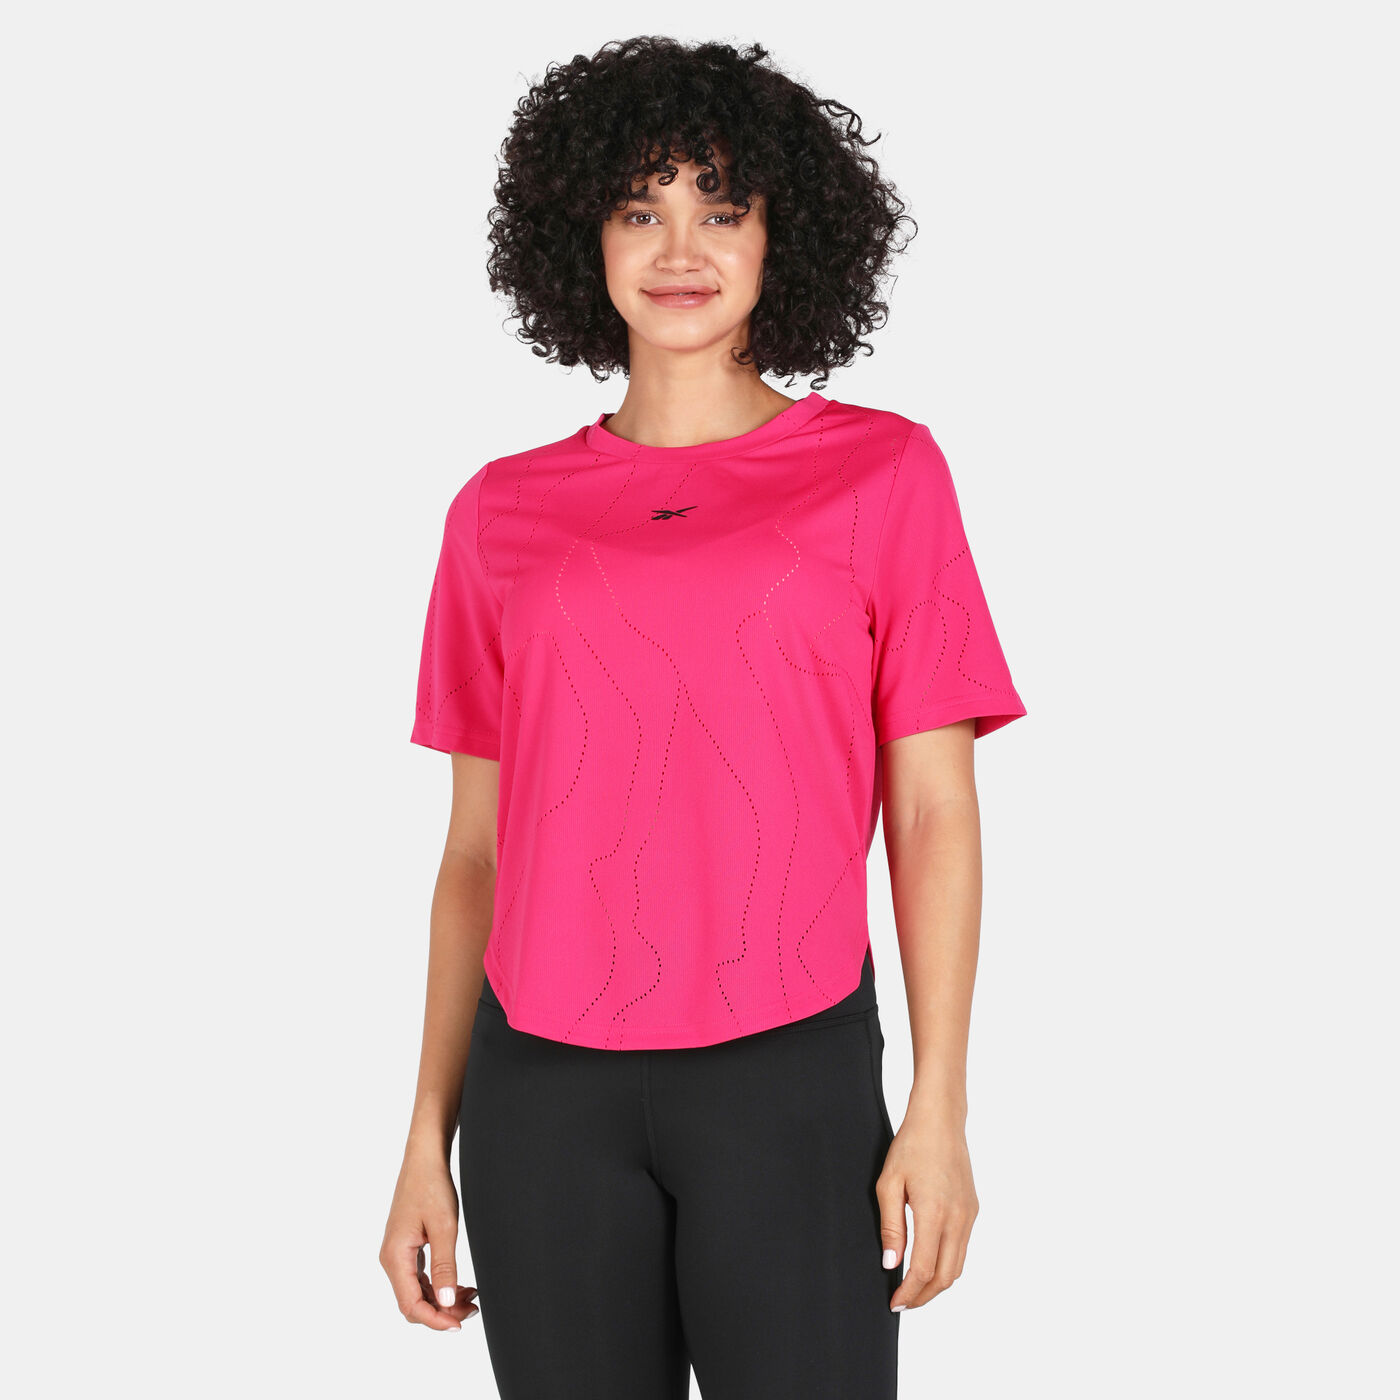 Women's United By Fitness Perforated T-Shirt